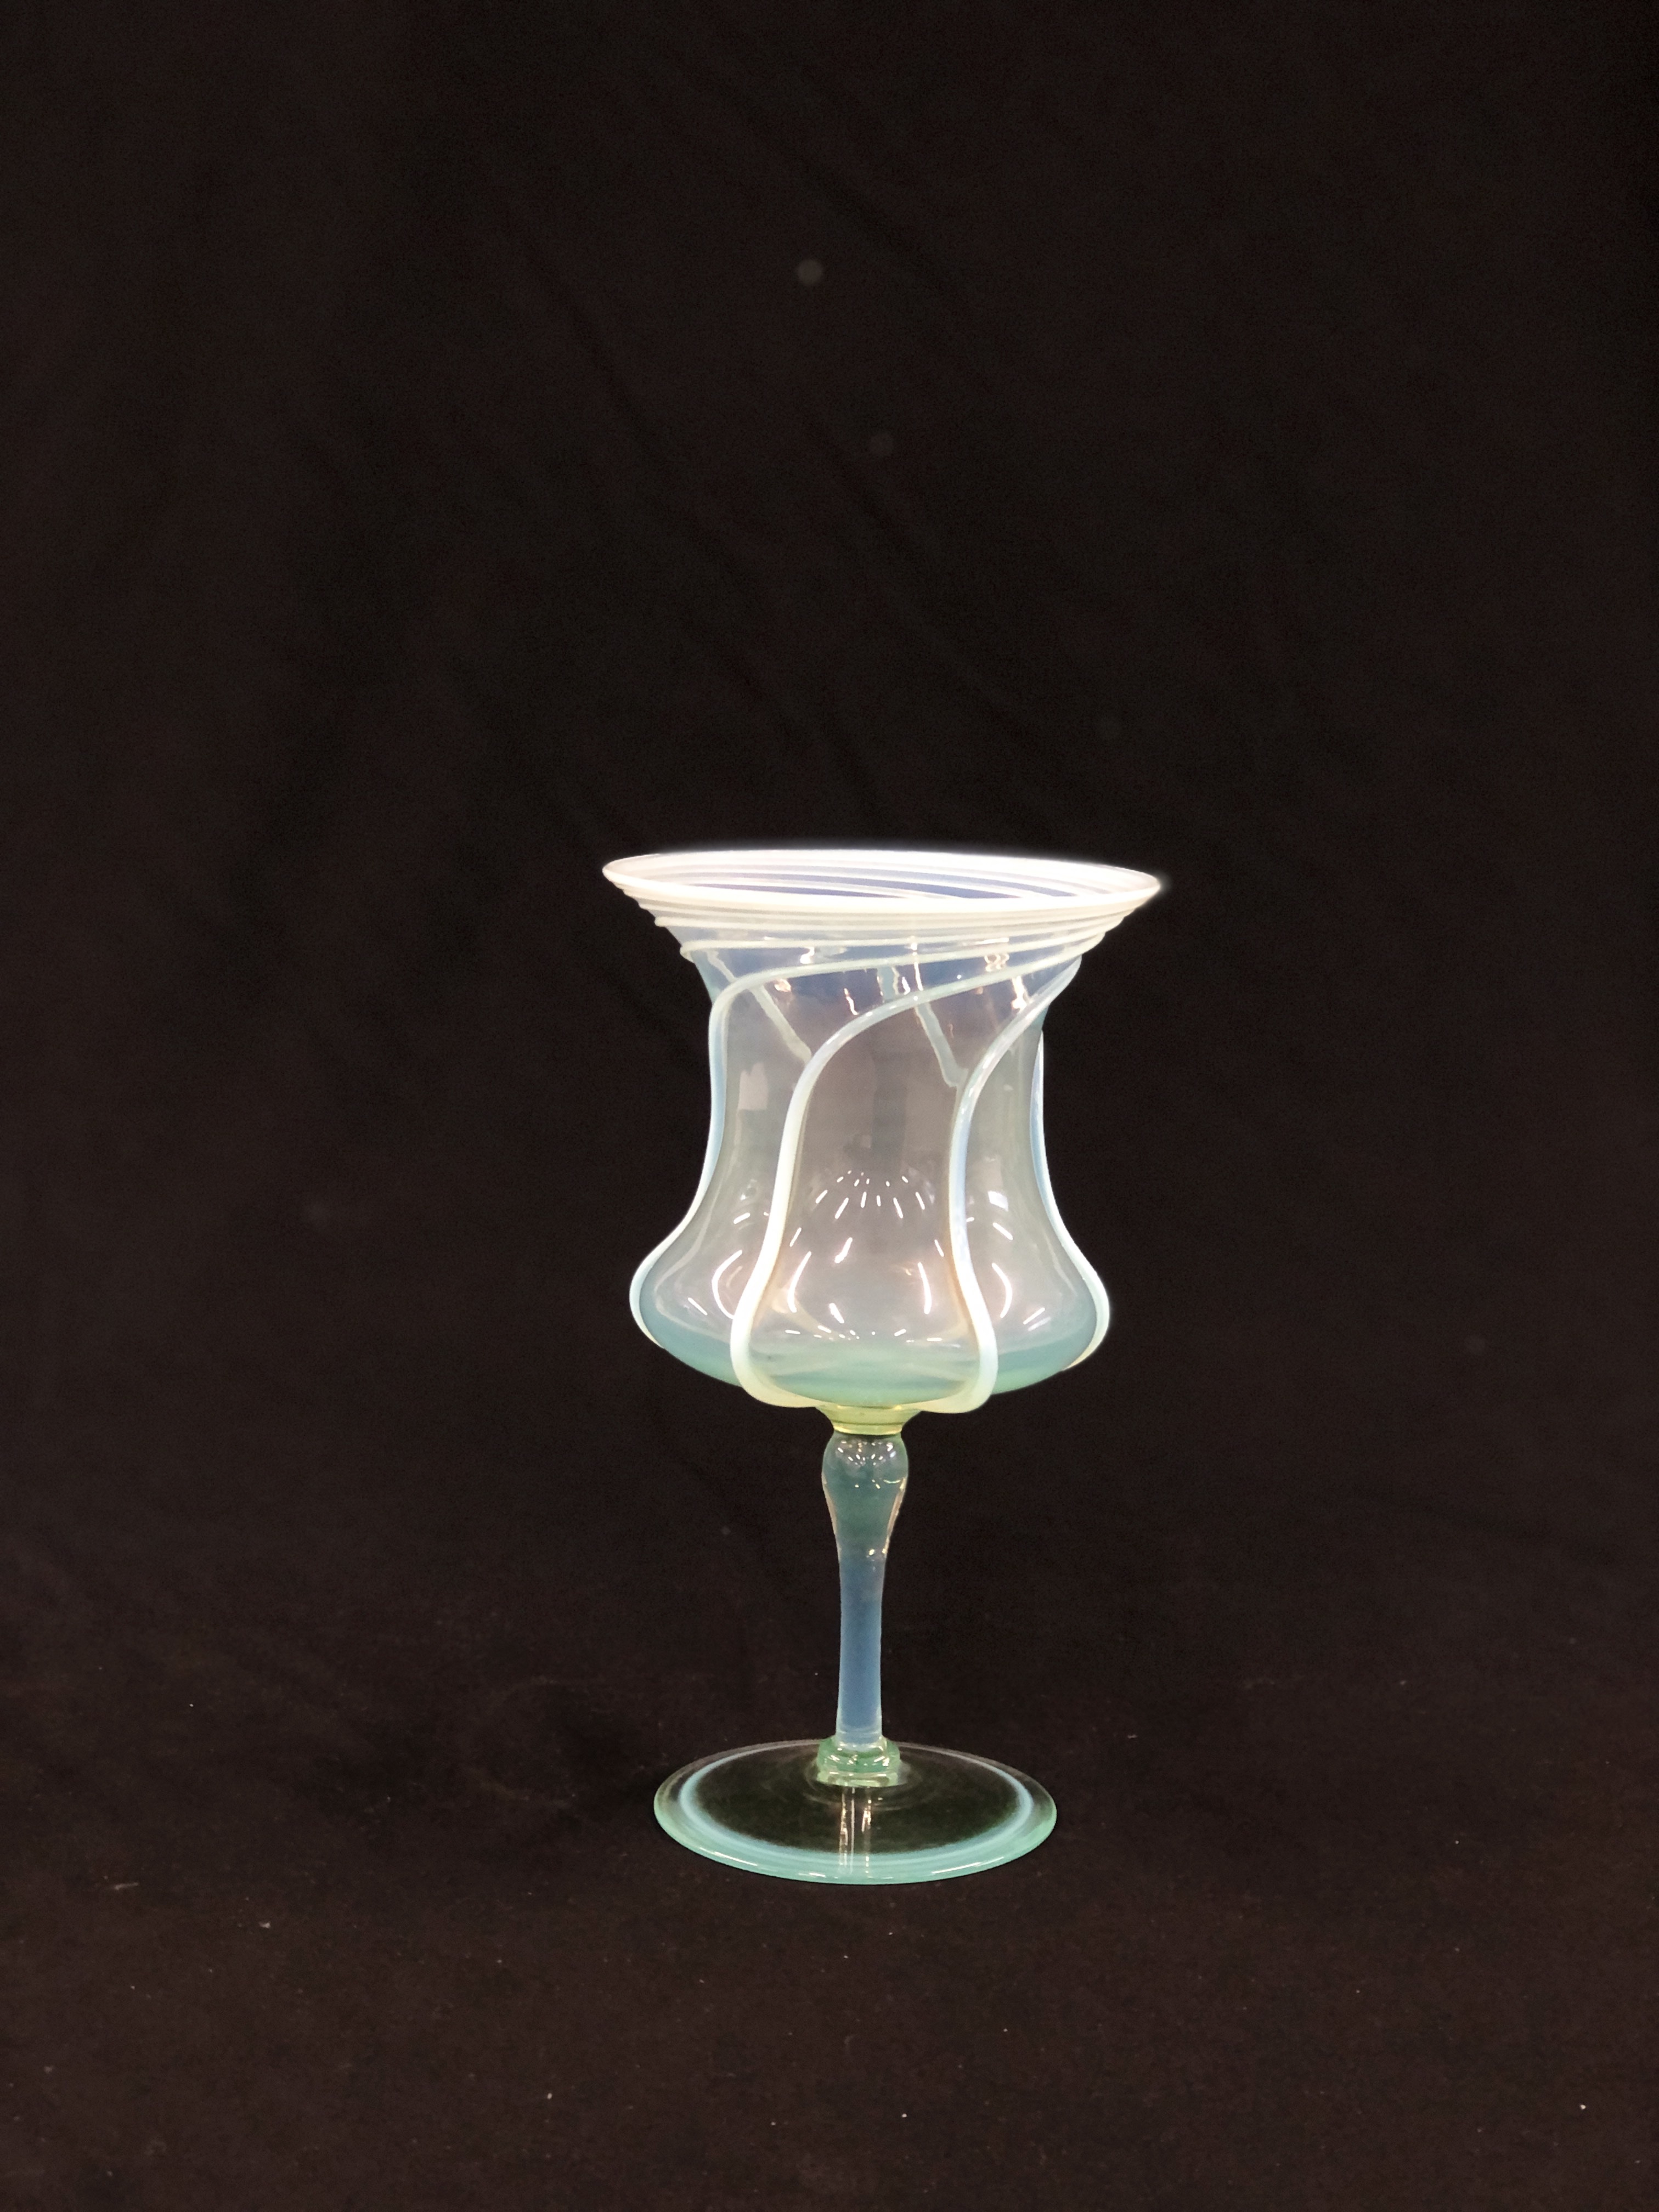 A VENETIAN GOBLET, PALE GREEN WITH SPIRAL OVERLAY ON THE THISTLE SHAPED BOWL, 23CM. HIGH.